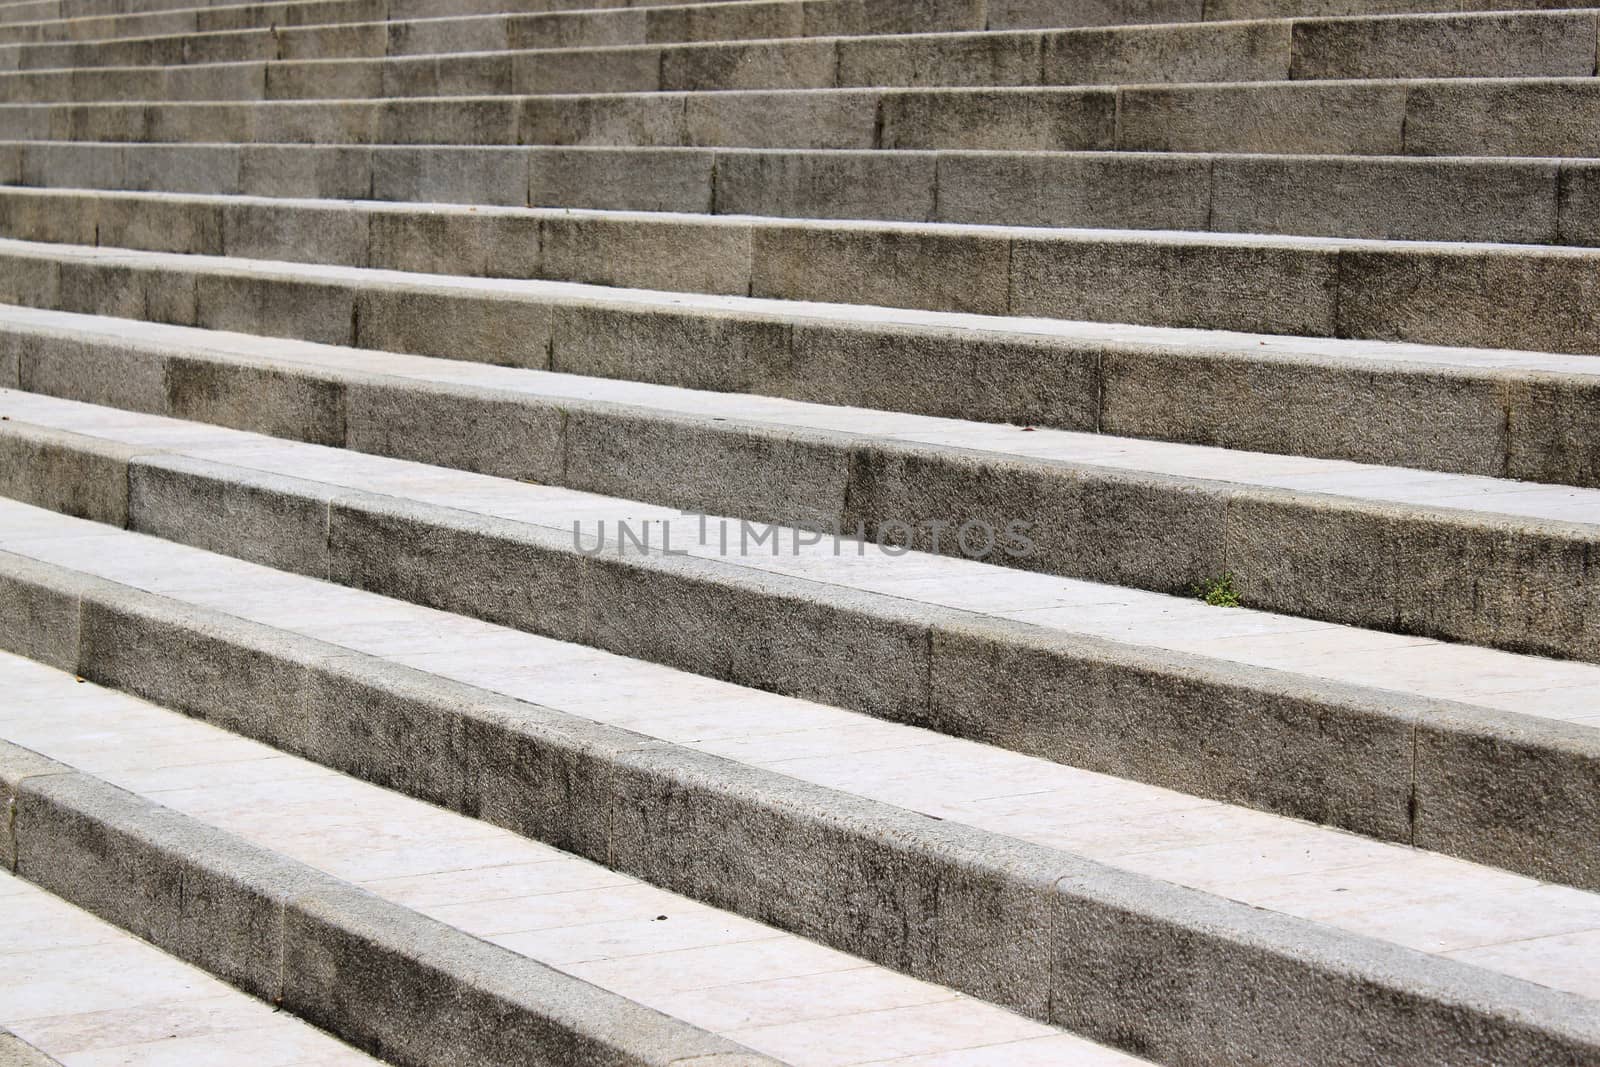 tiled concrete stairs outside in a city